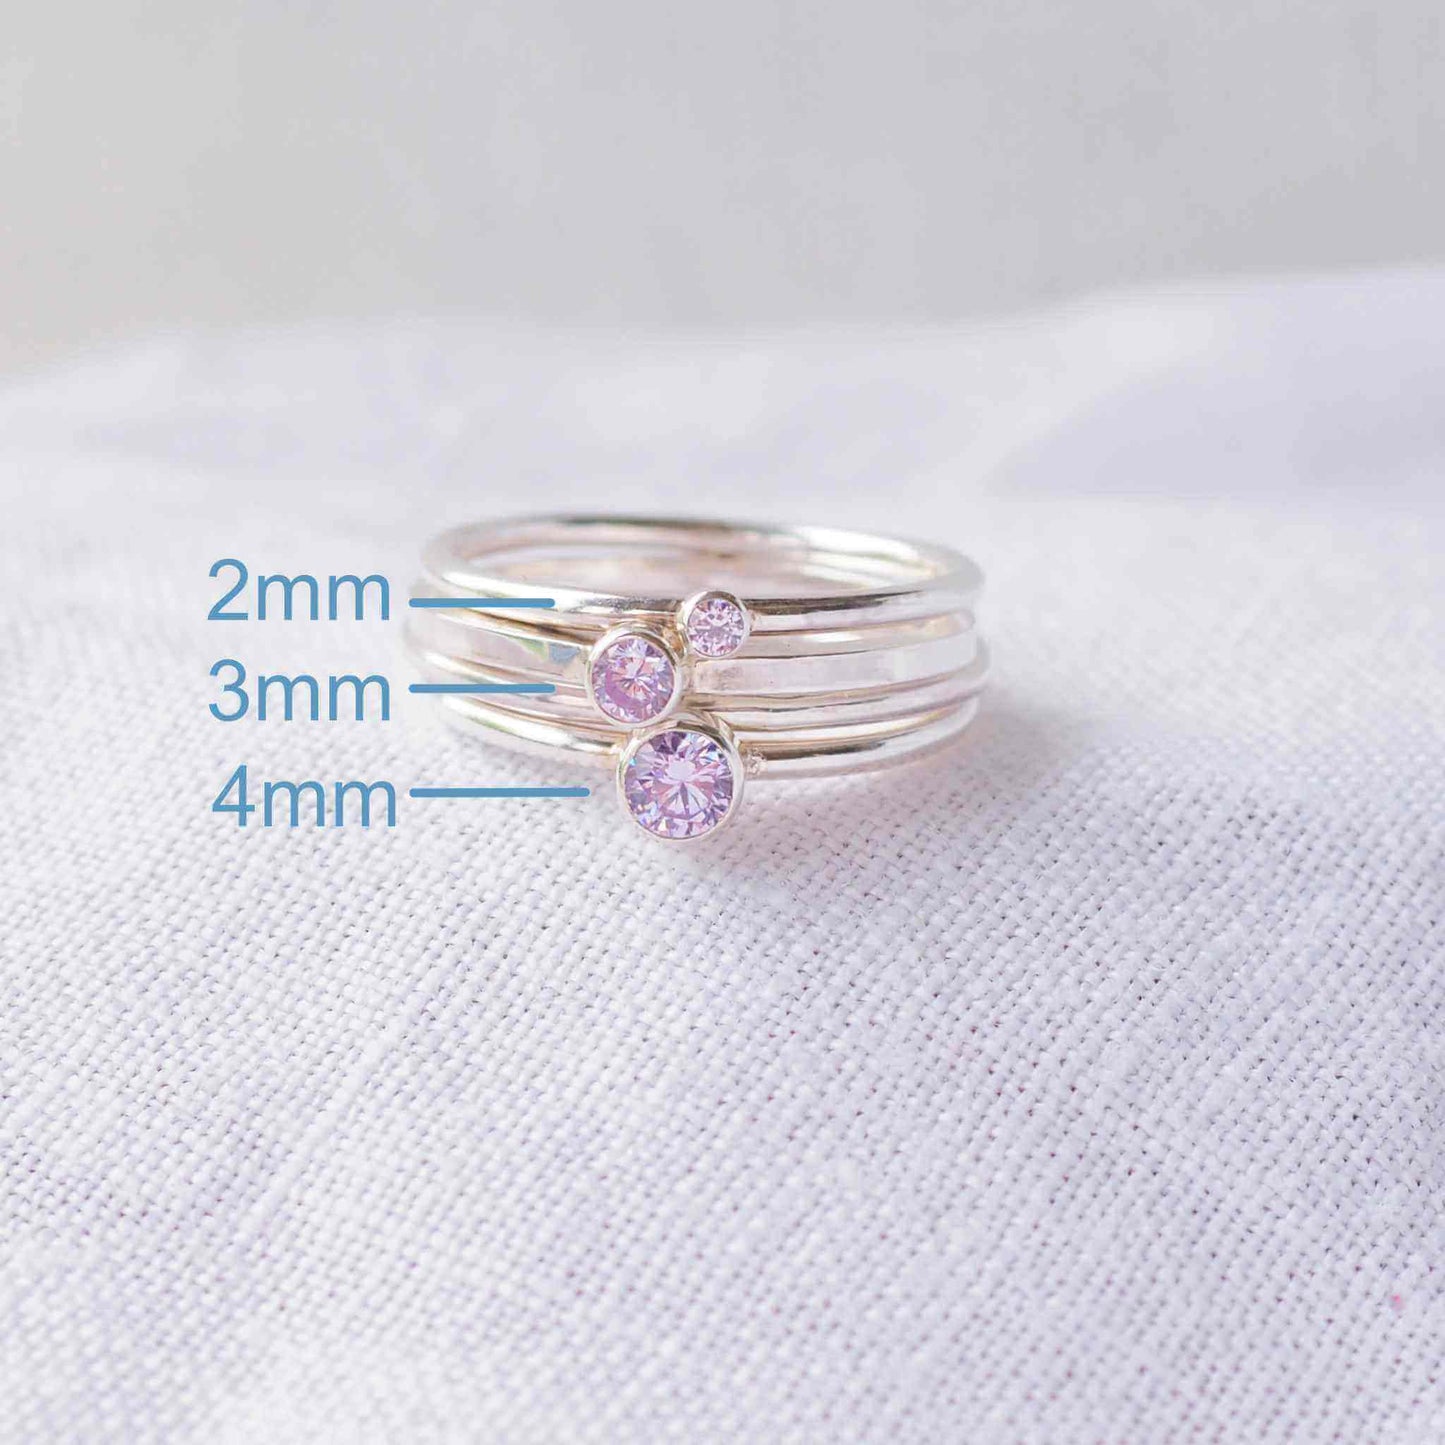 Three rings showing the square and round band styles with three different sized Cubic Zirconia in a pale Lavender Alexandrite colour. The rings are made from Sterling Silver and a round pale purple cubic zirconia measuring 2,3 or 4mm in size. Handmade by maram jewellery in Scotland